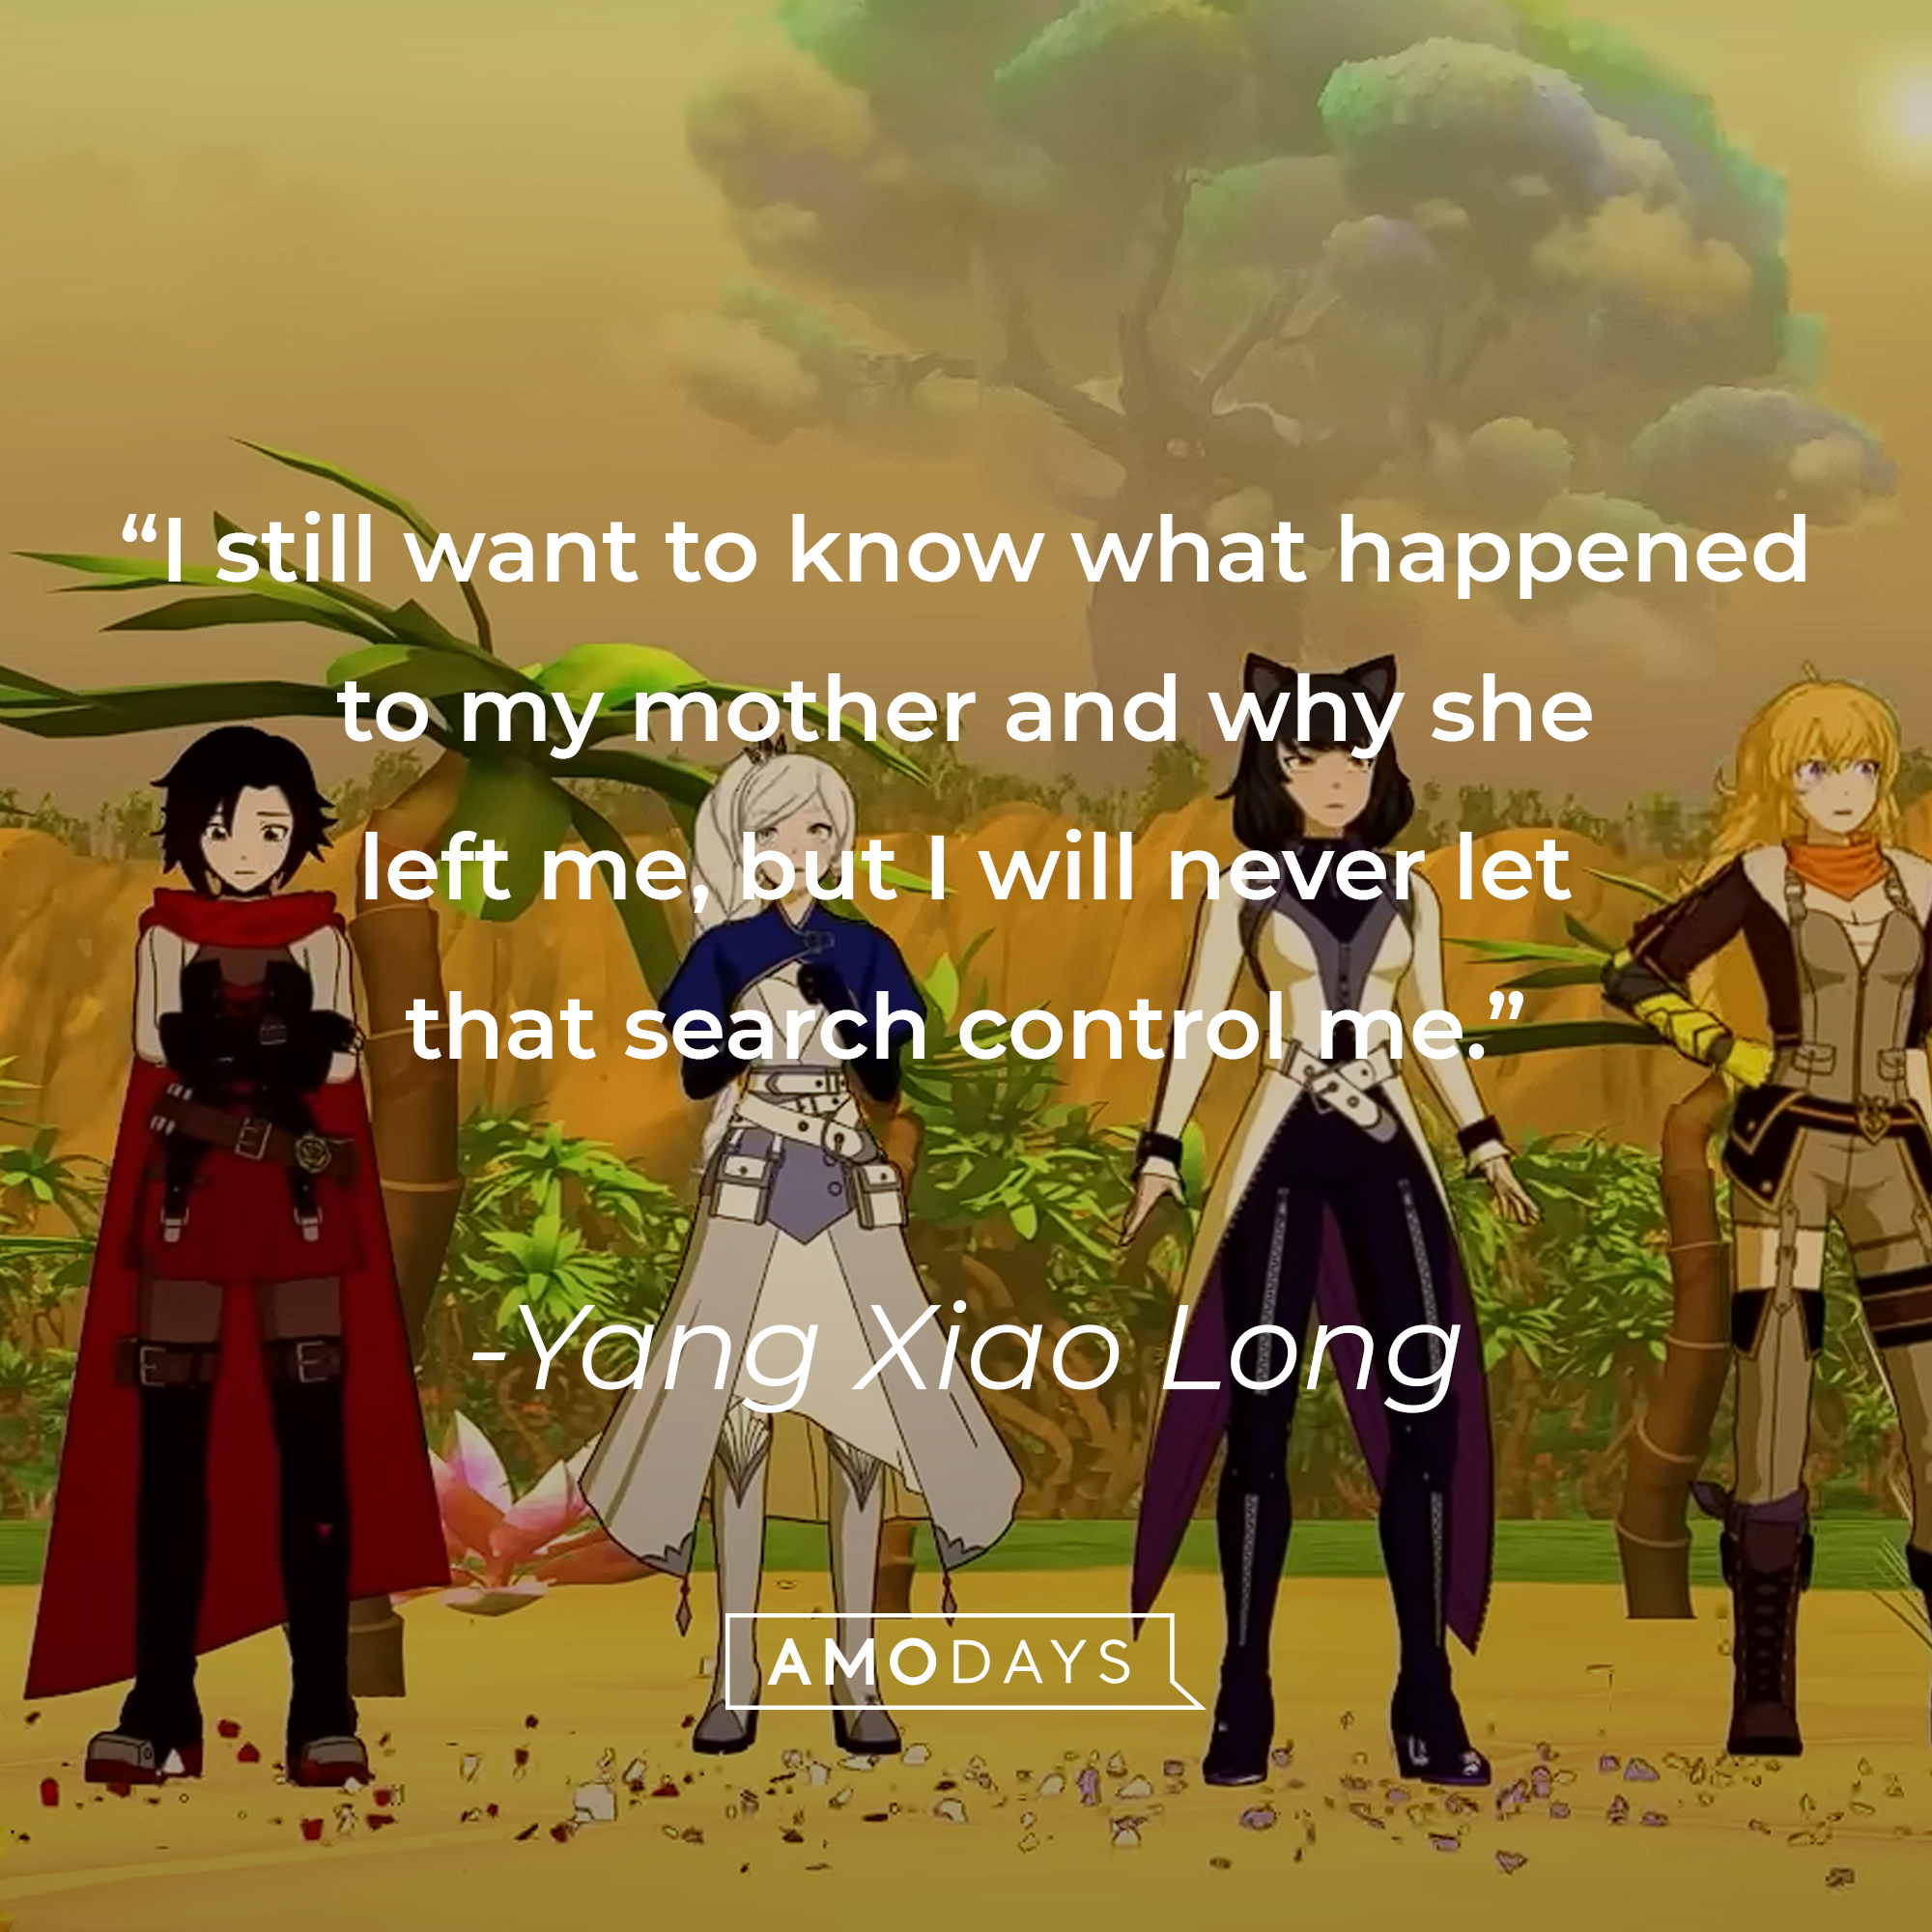 Yang Xiao Long's quote: "I still want to know what happened to my mother and why she left me, but I will never let that search control me." | Source: Youtube.com/crunchyrolldubs